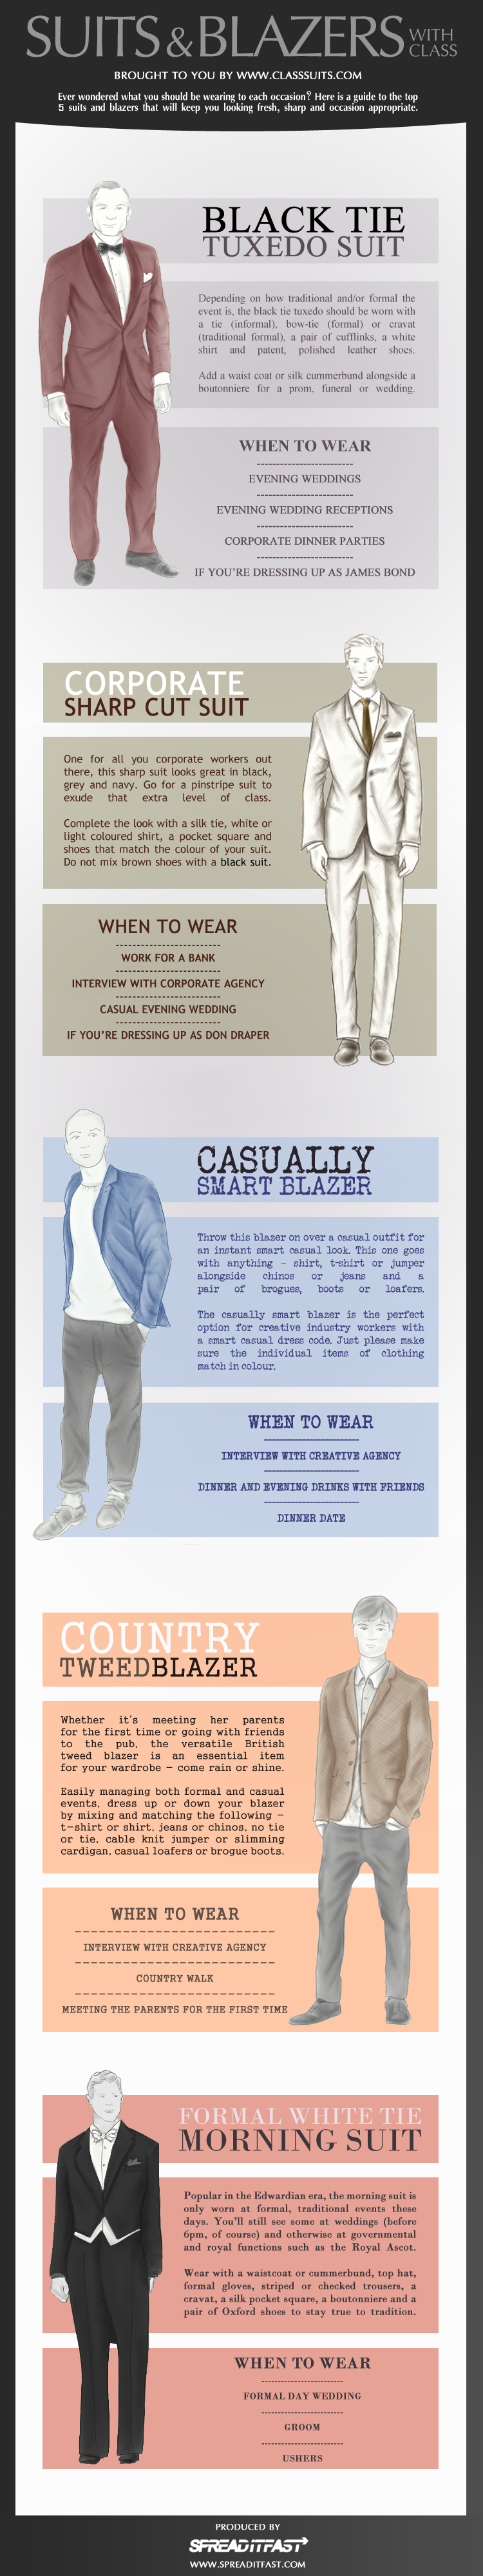 types of suits and blazers